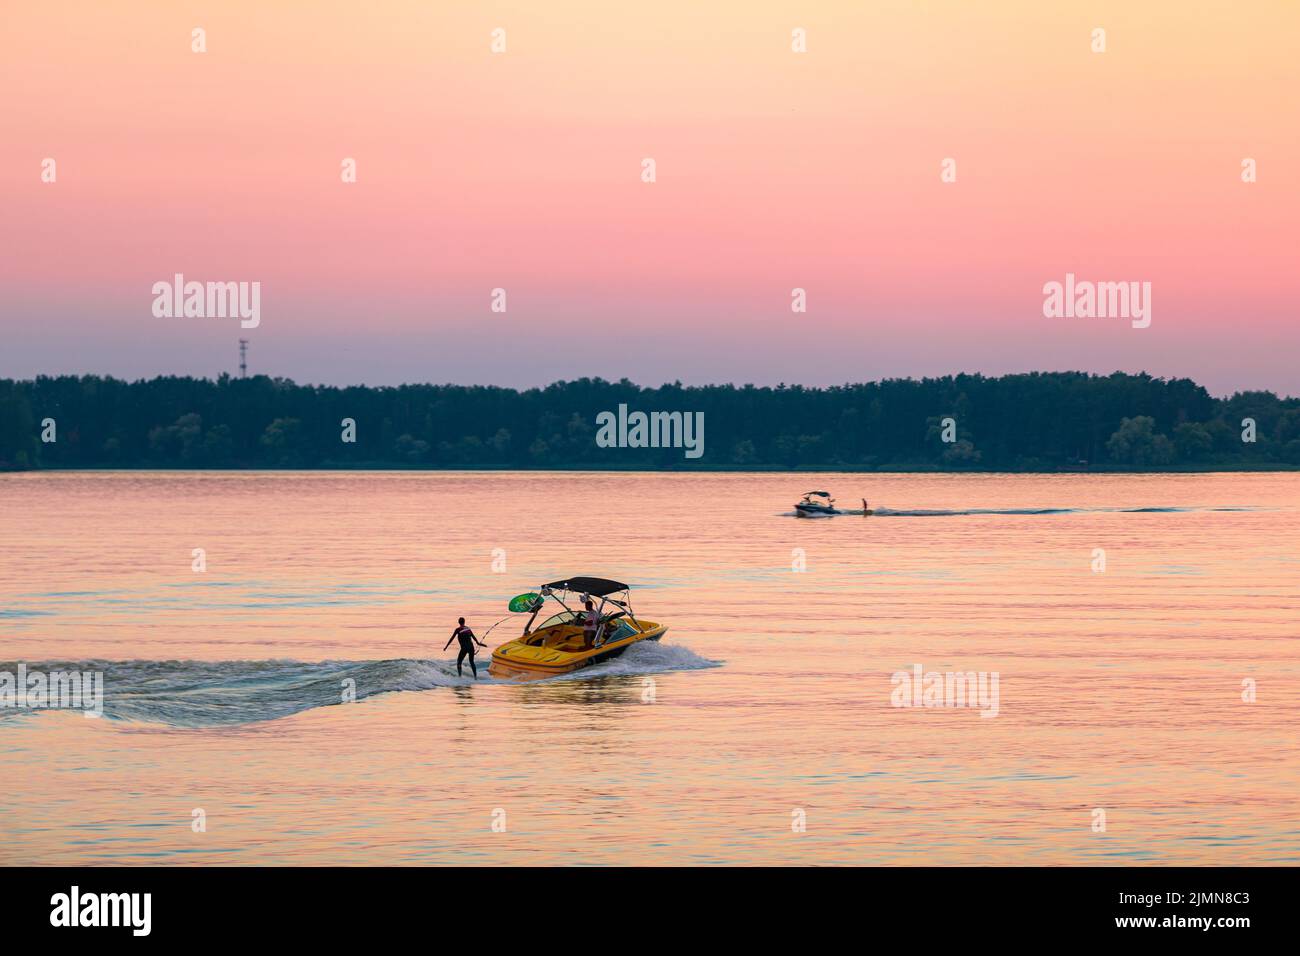 A boat pulls a person over the waves on a wakeboard. Wakeboarding at sunset. Stock Photo